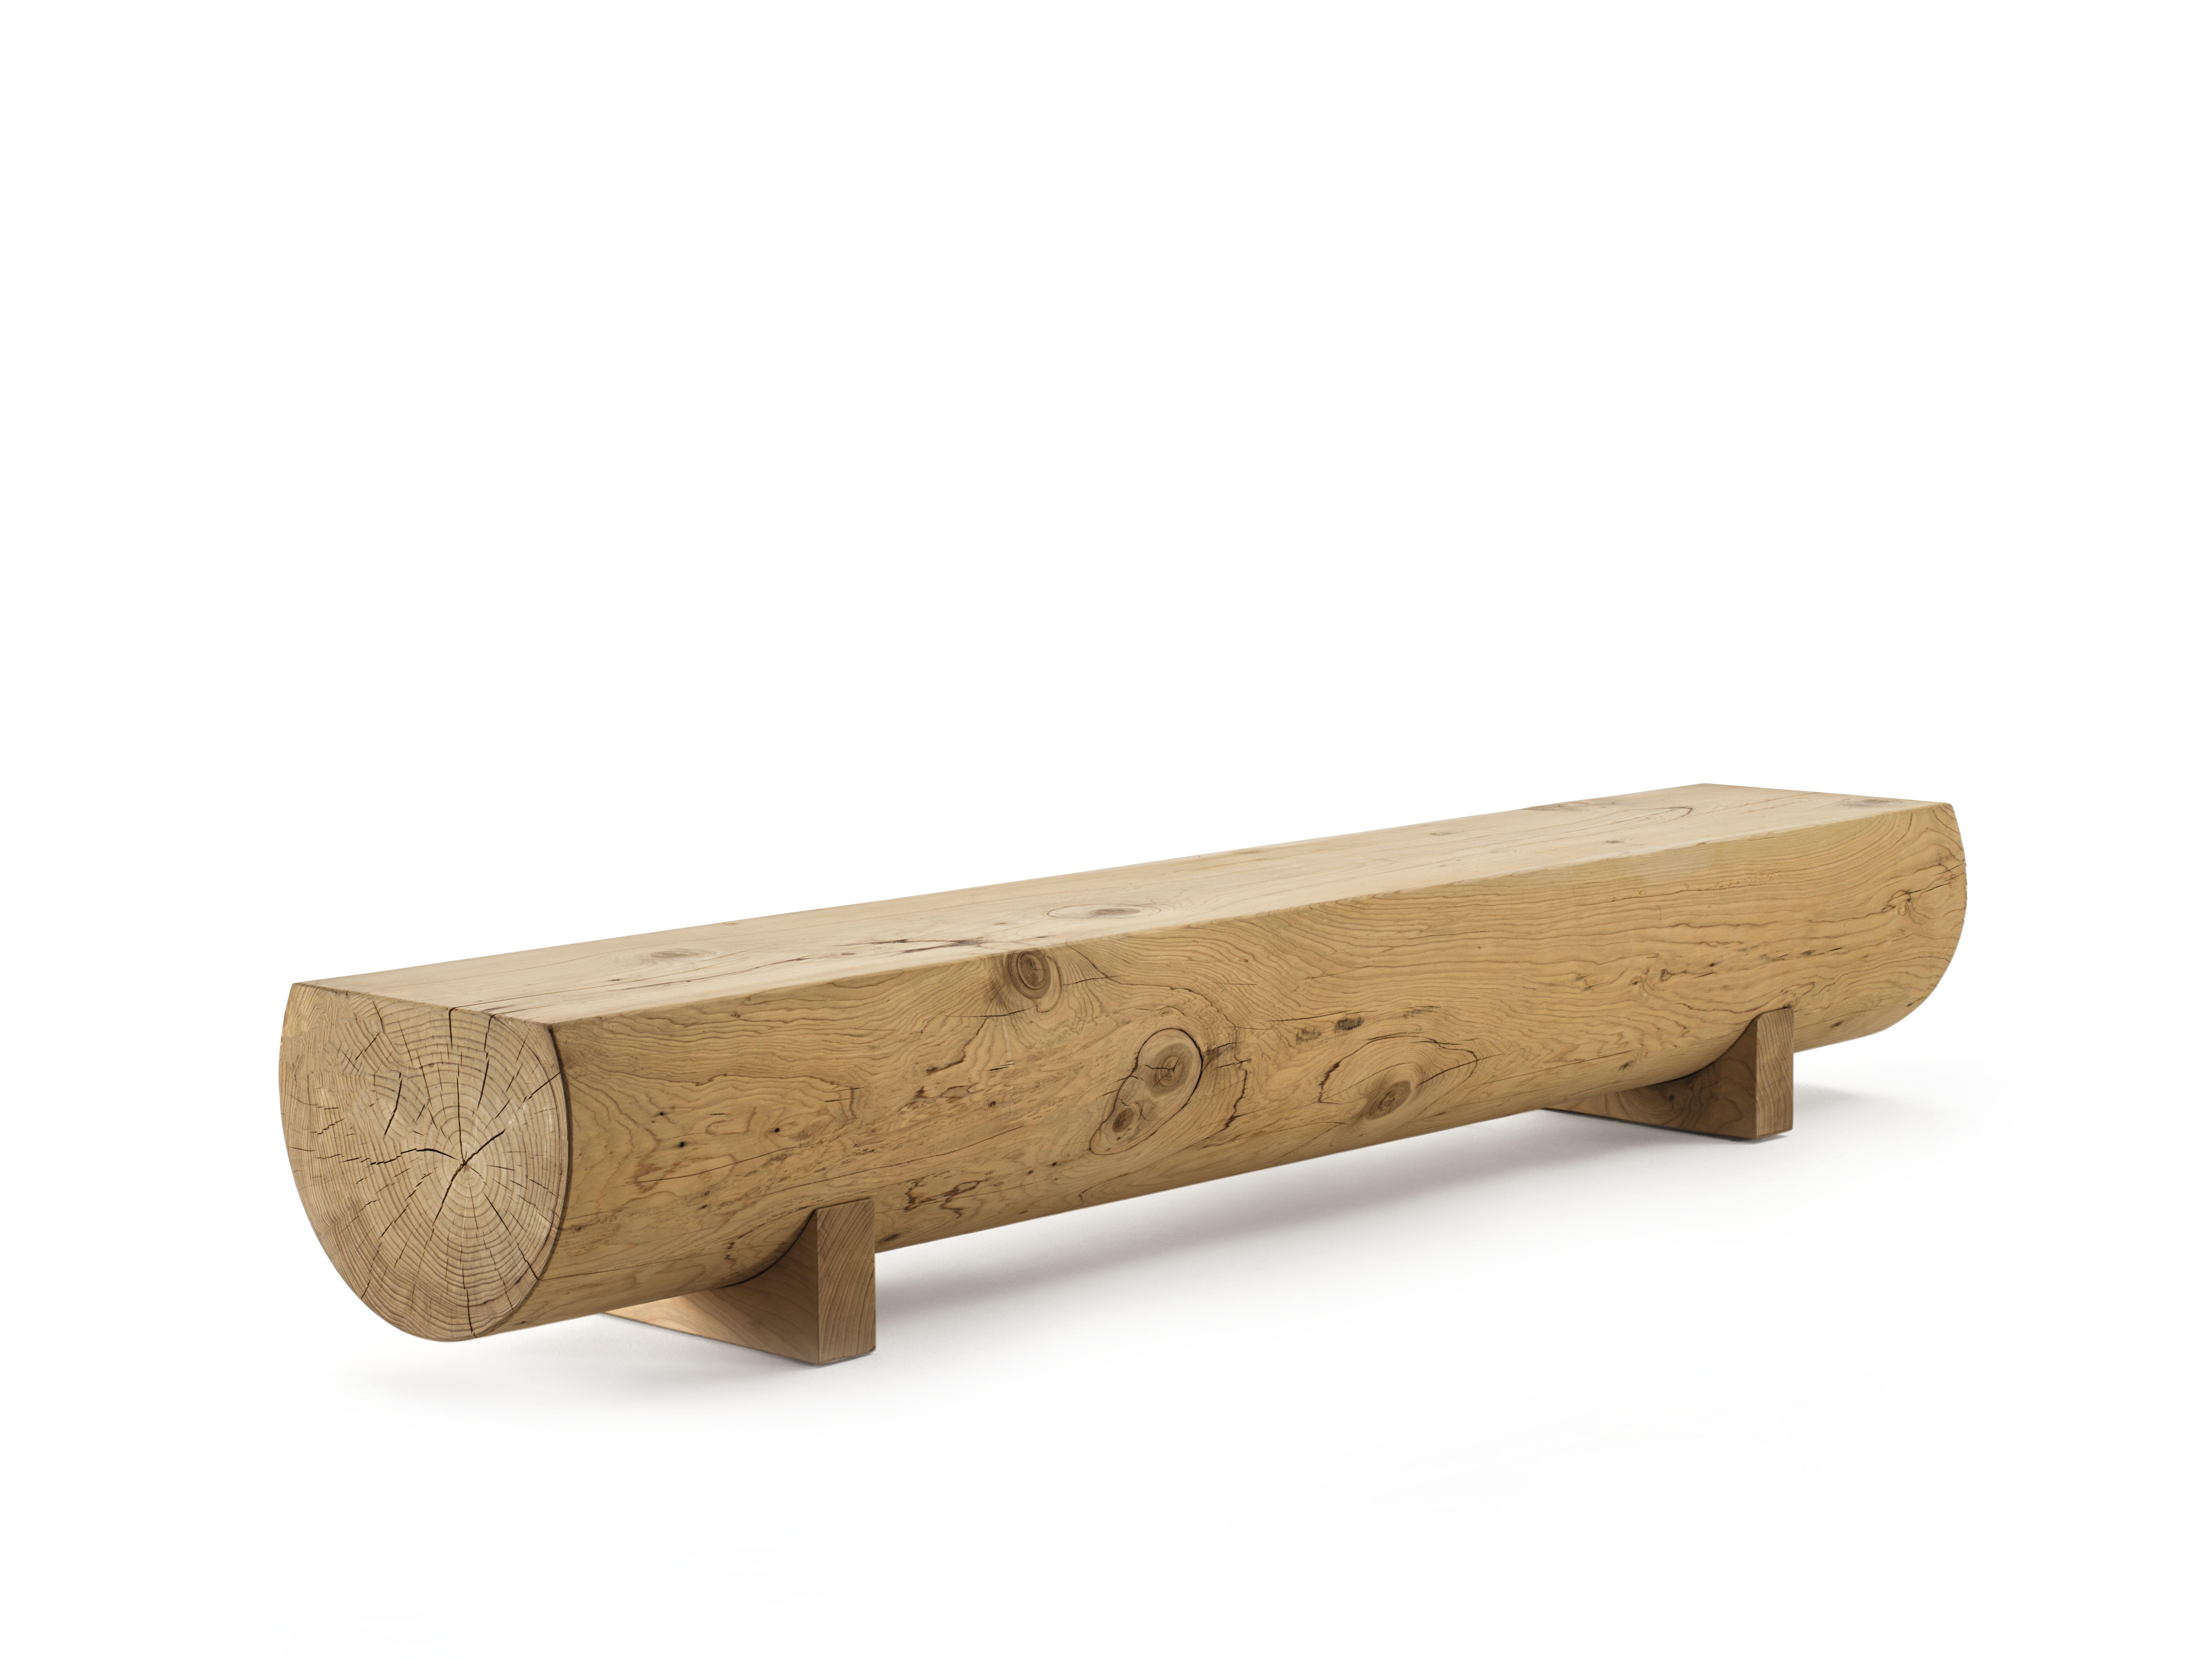 Bench made from a single block of scented cedar. Distinguished by its minimalist and extremely natural design. Rests on feet made from the same wood.